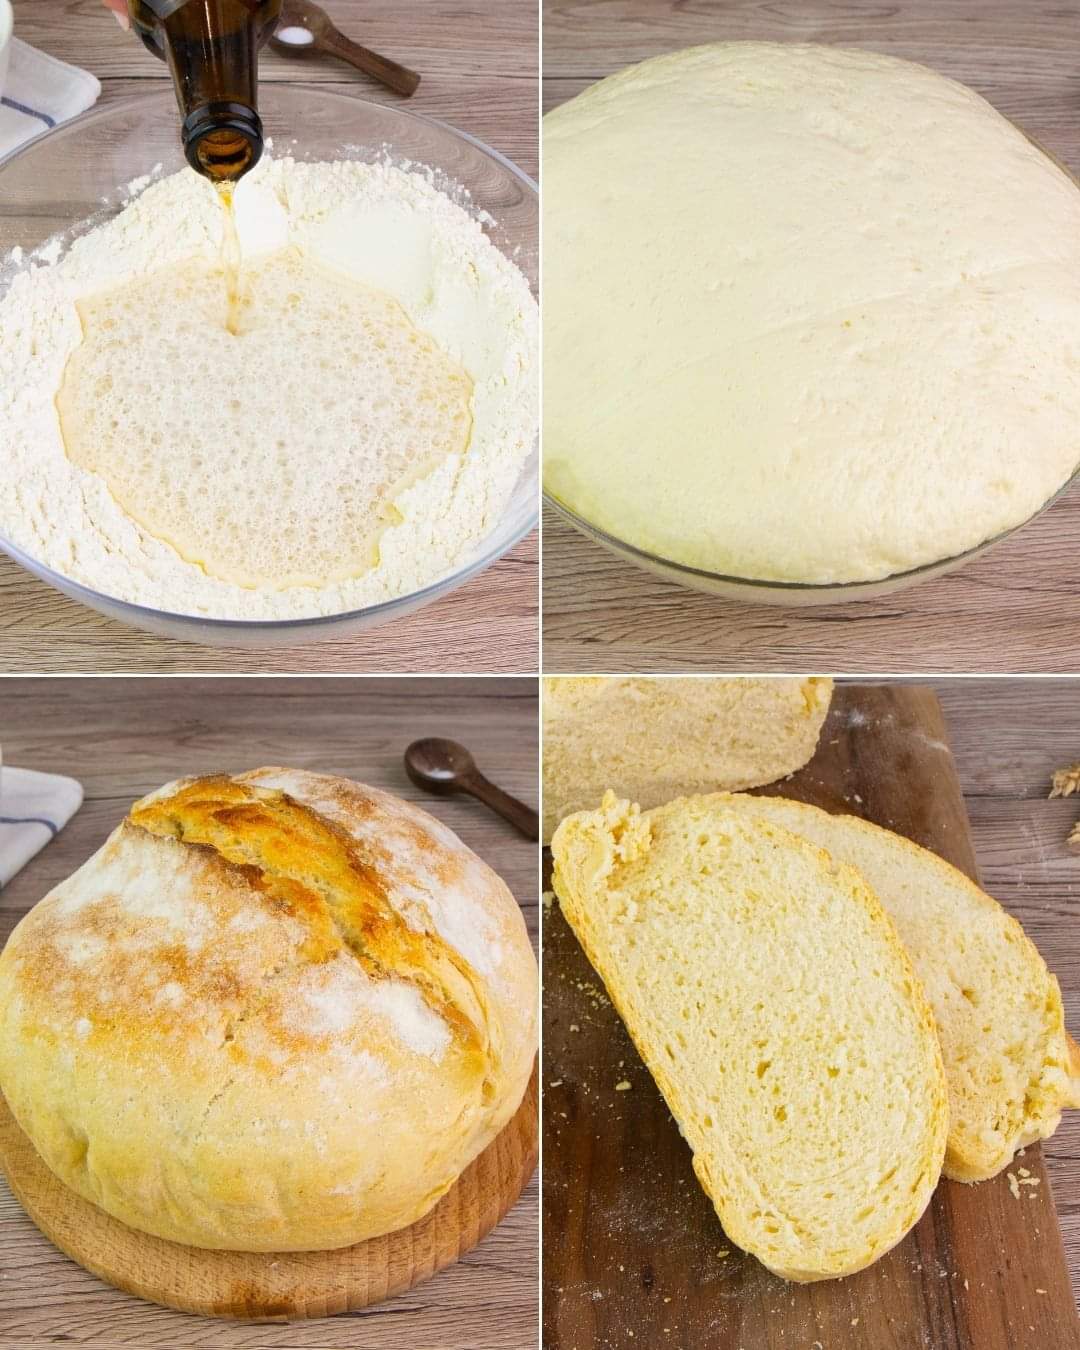 Beer bread: soft and fragrant!